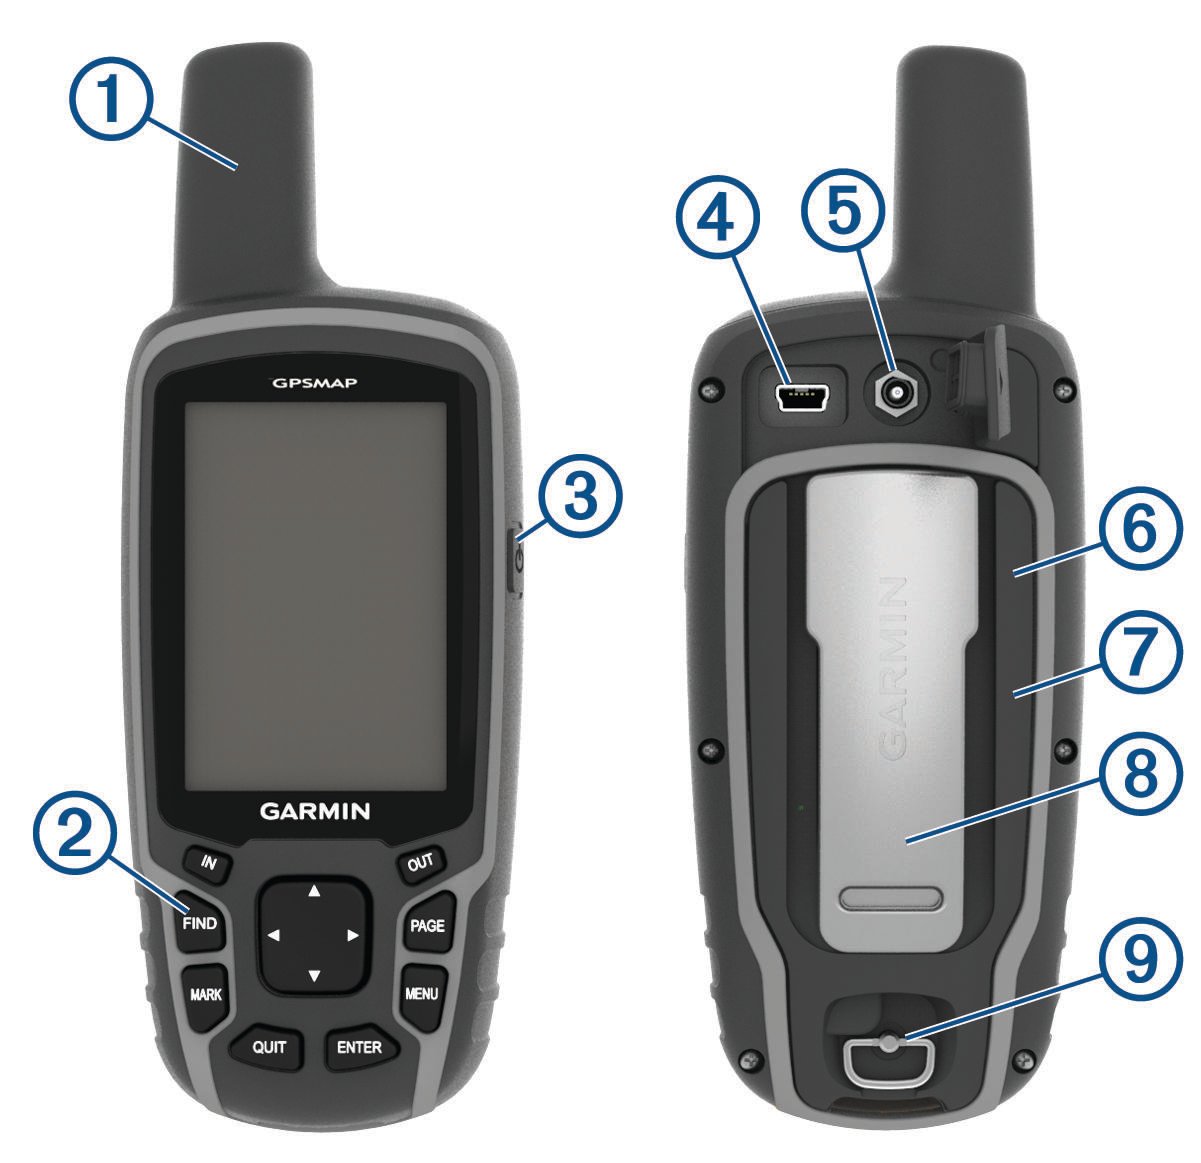 Front and back views of the device with callouts